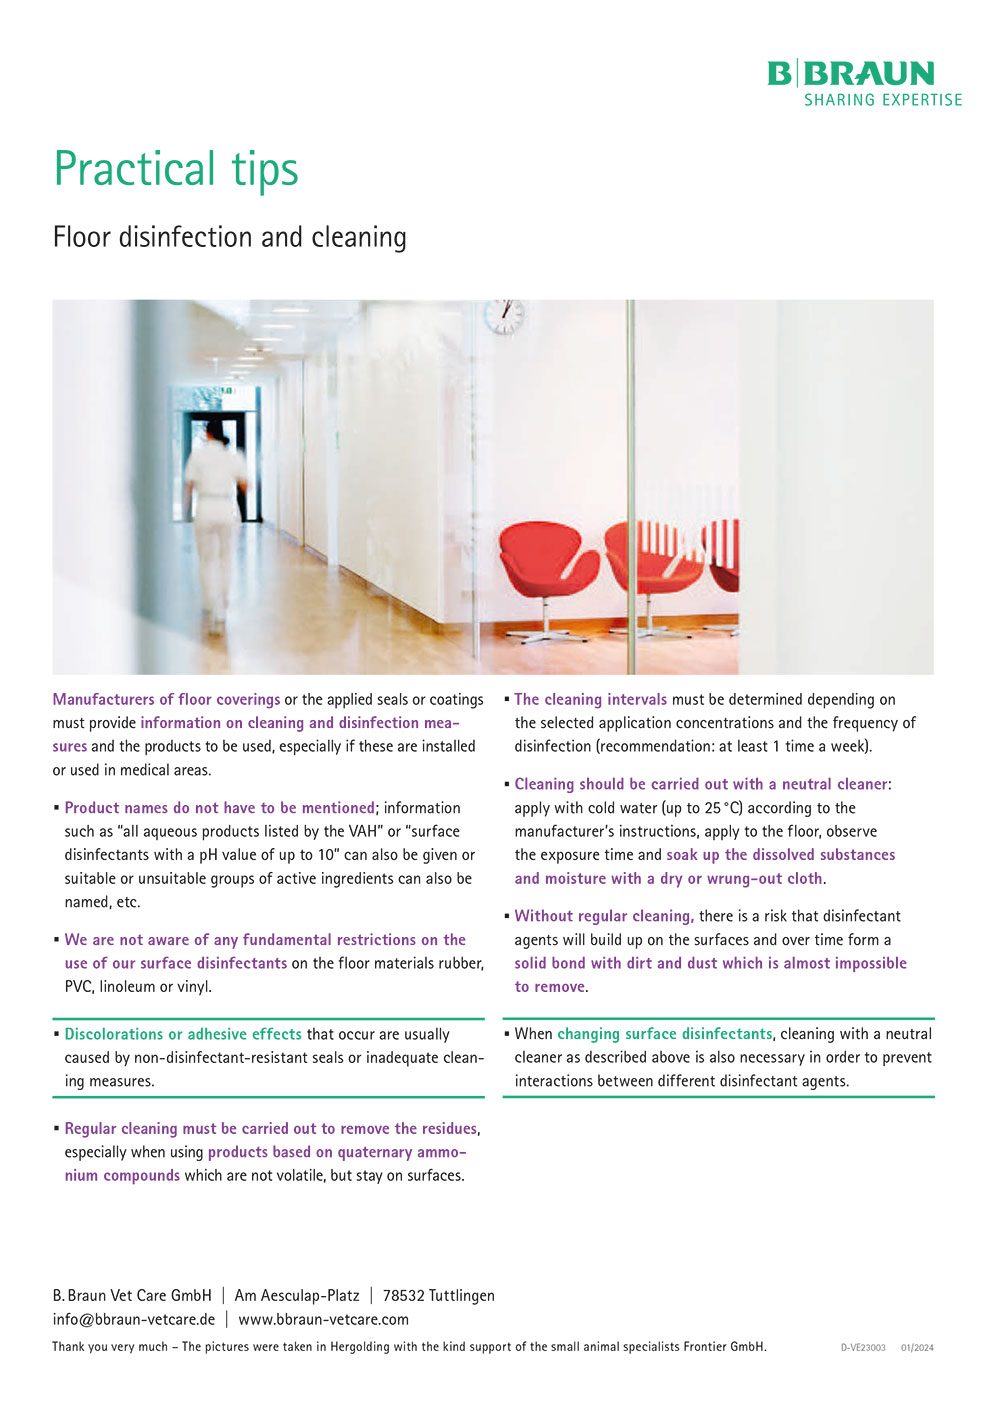 Practical tips: Floor disinfection and cleaning